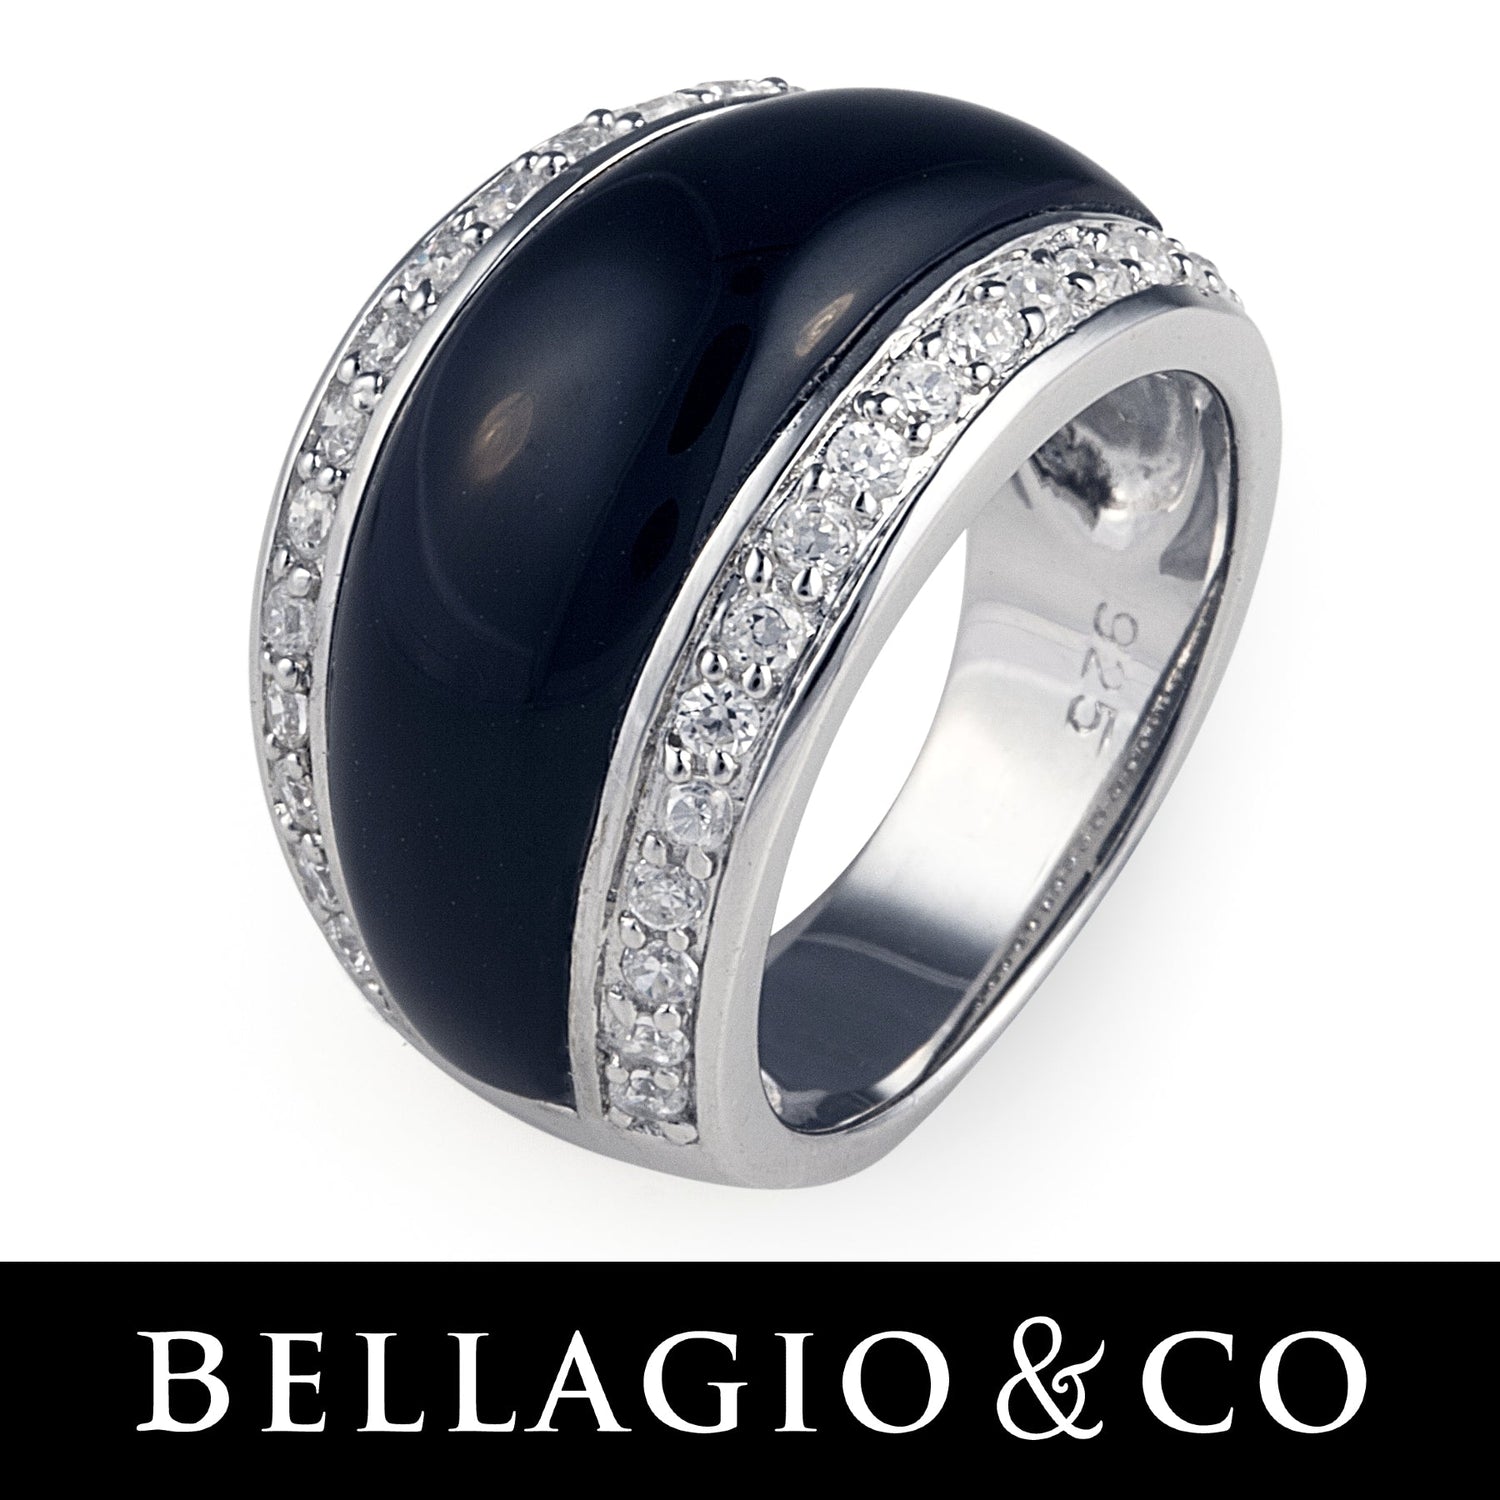 Shop our range of jewellery with beautiful Onyx stones. Luxury jewellery by Bellagio & Co. Worldwide shipping plus FREE shipping for orders over $150.00 within Australia.